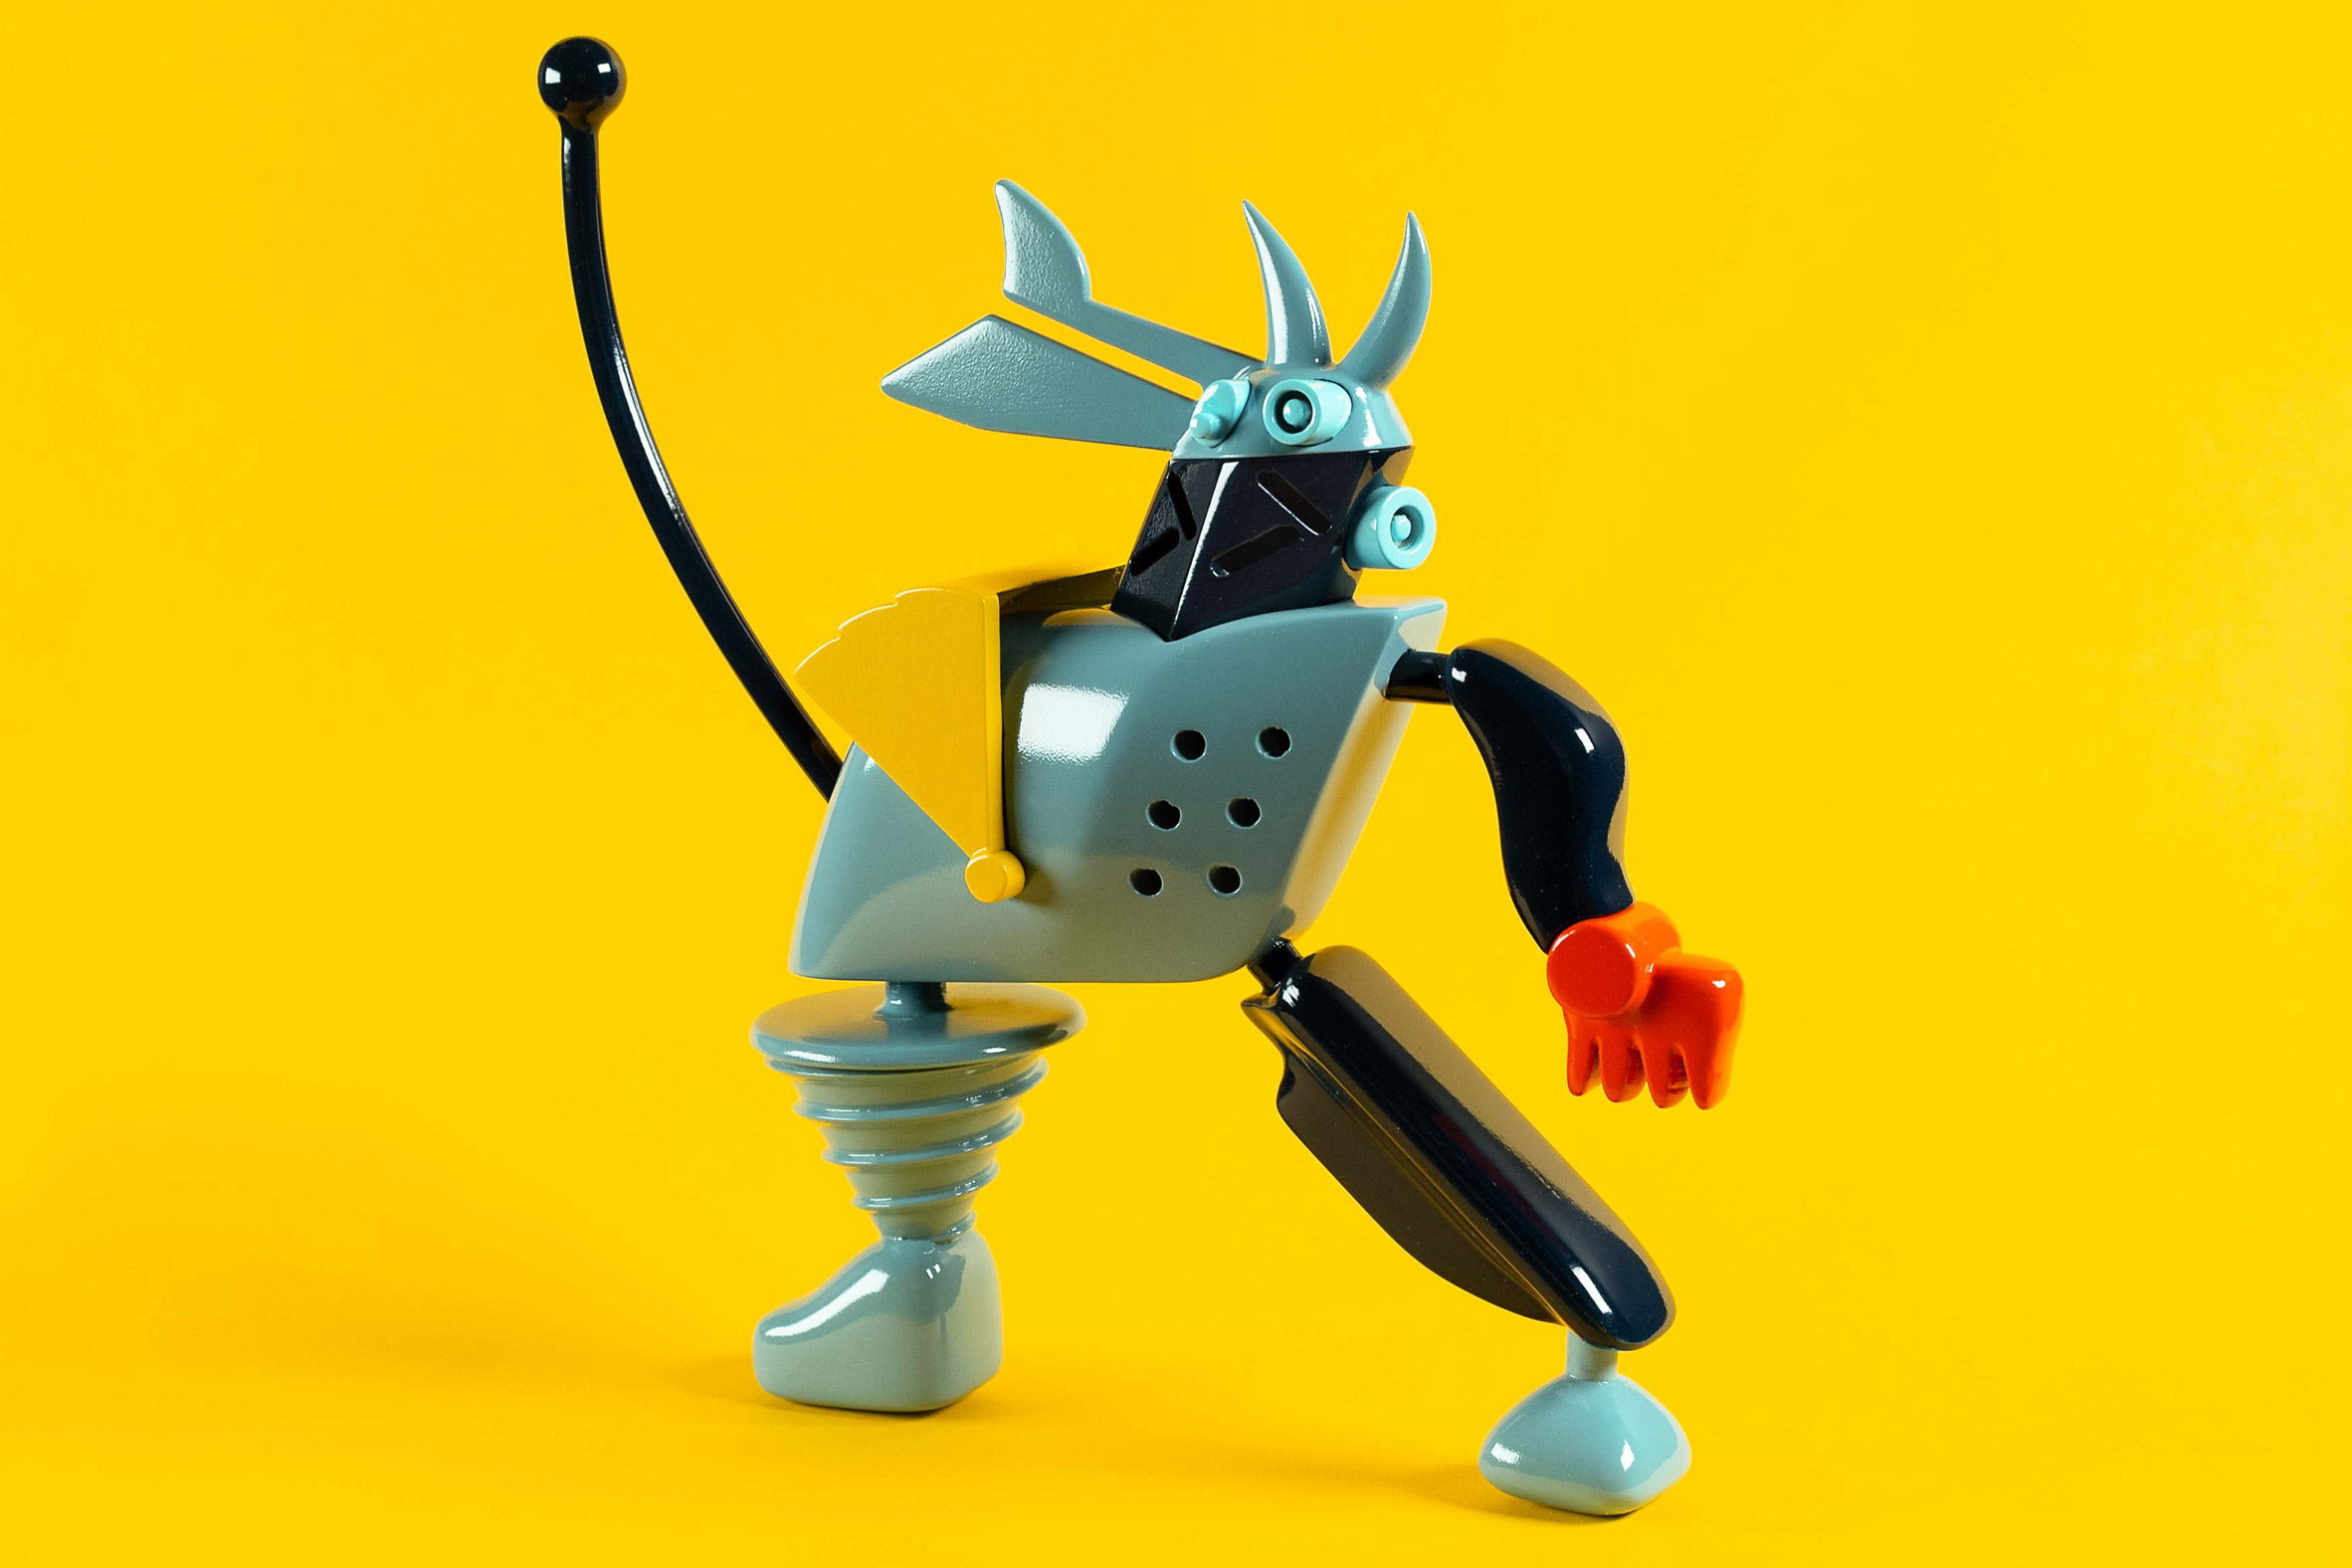 Robot in front of yellow background